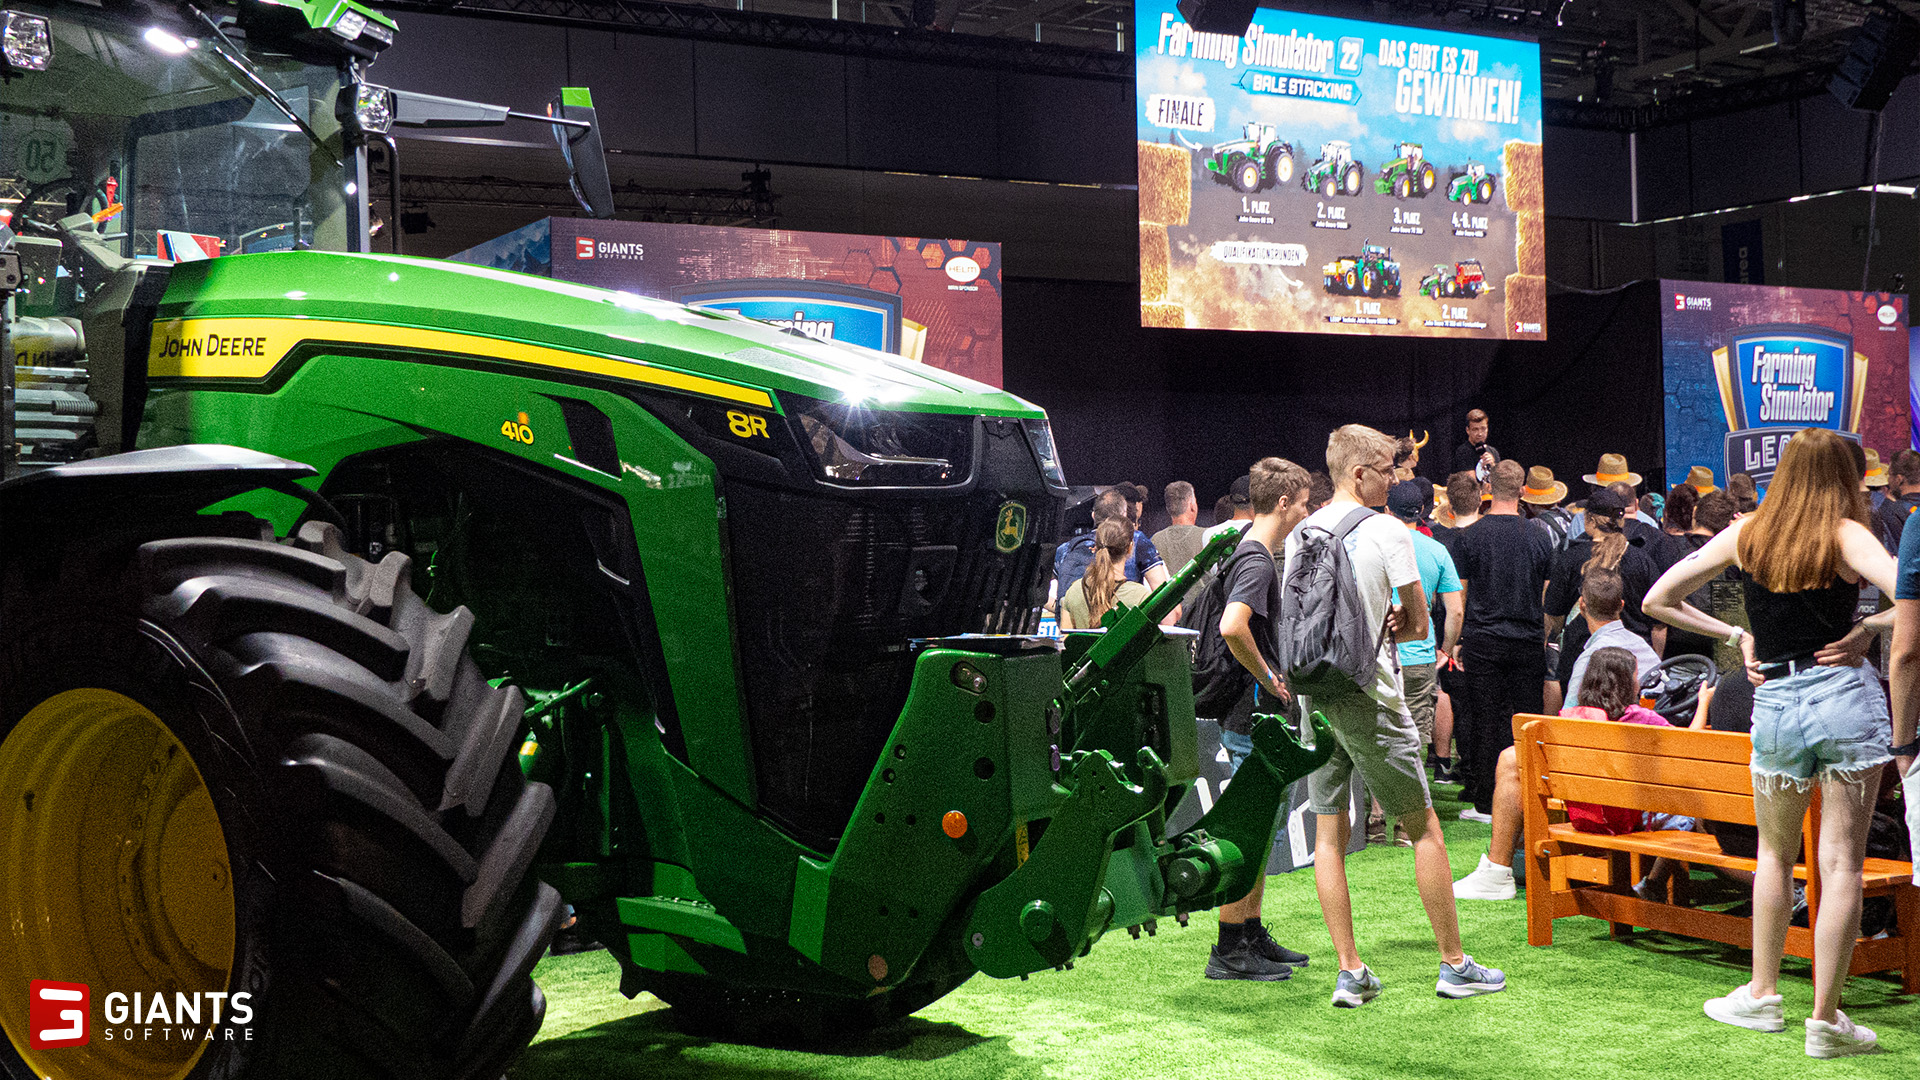 Farming Simulator on X: You're at @gamescom? Then swing by our booth, test  your skills in the Bale Stacking Challenge and win fantastic prizes  sponsored by @JohnDeere!  / X